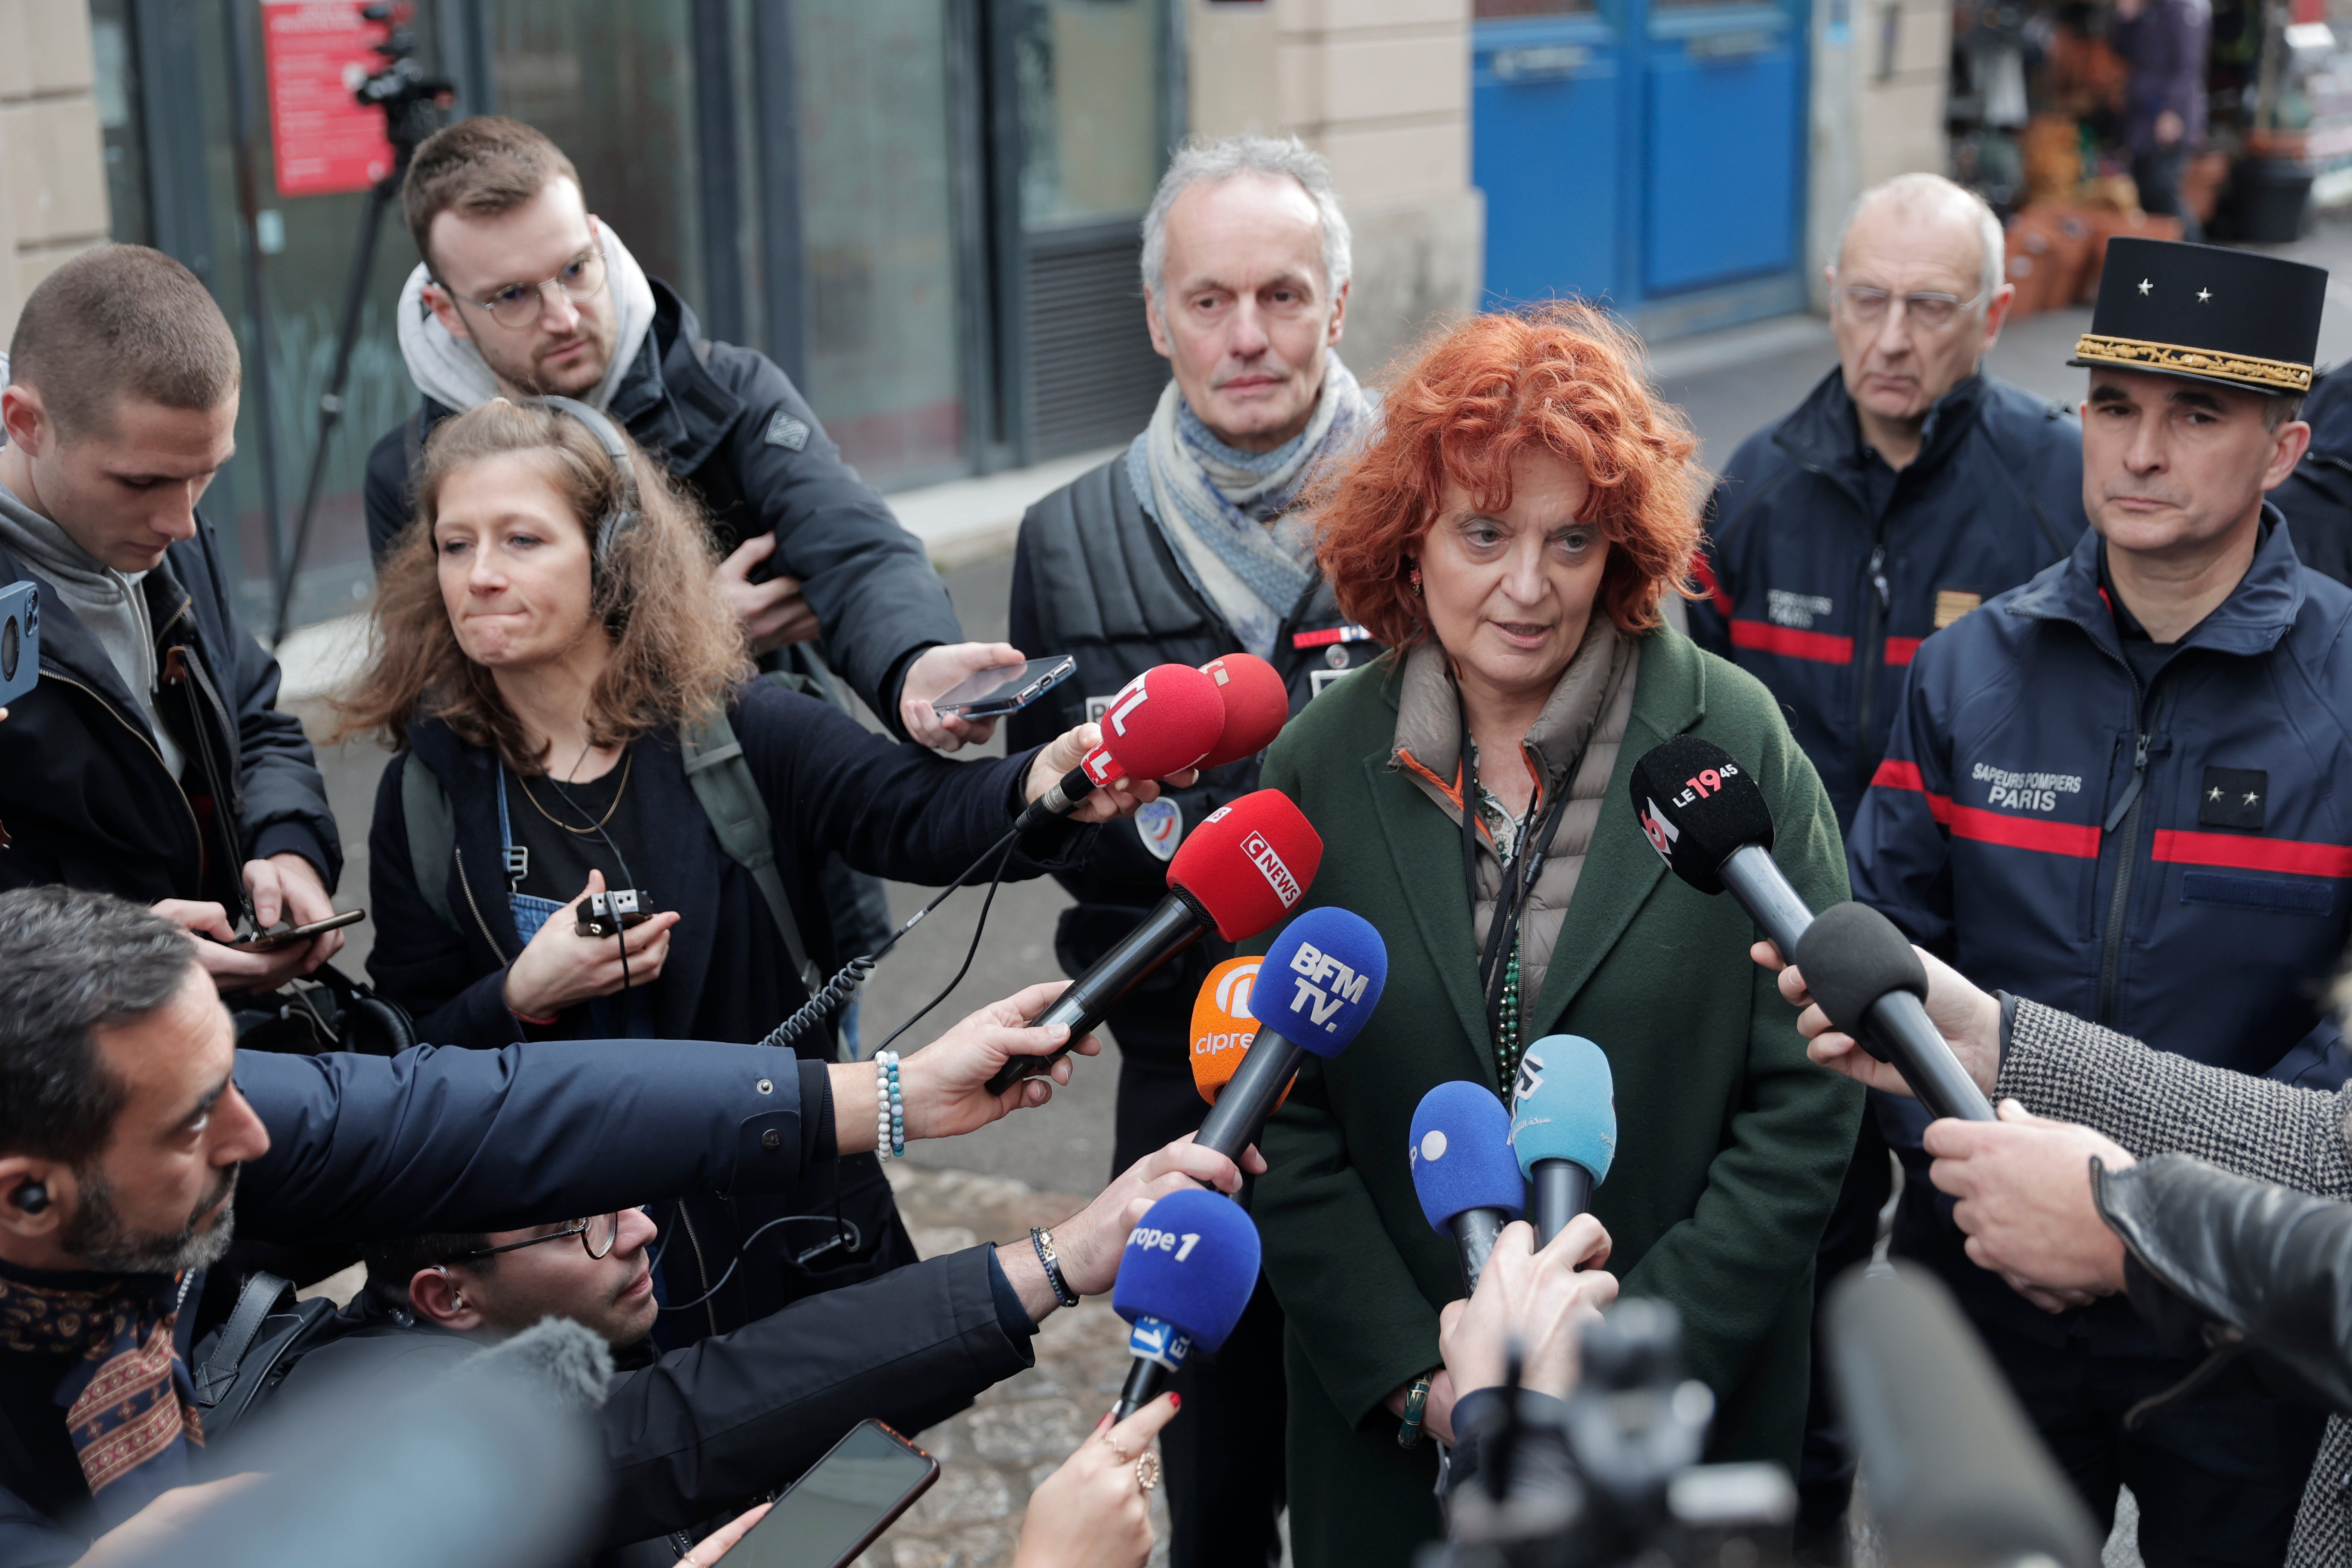 Paris prosecutor Laure Beccuau said that the attacker was known to the authorities